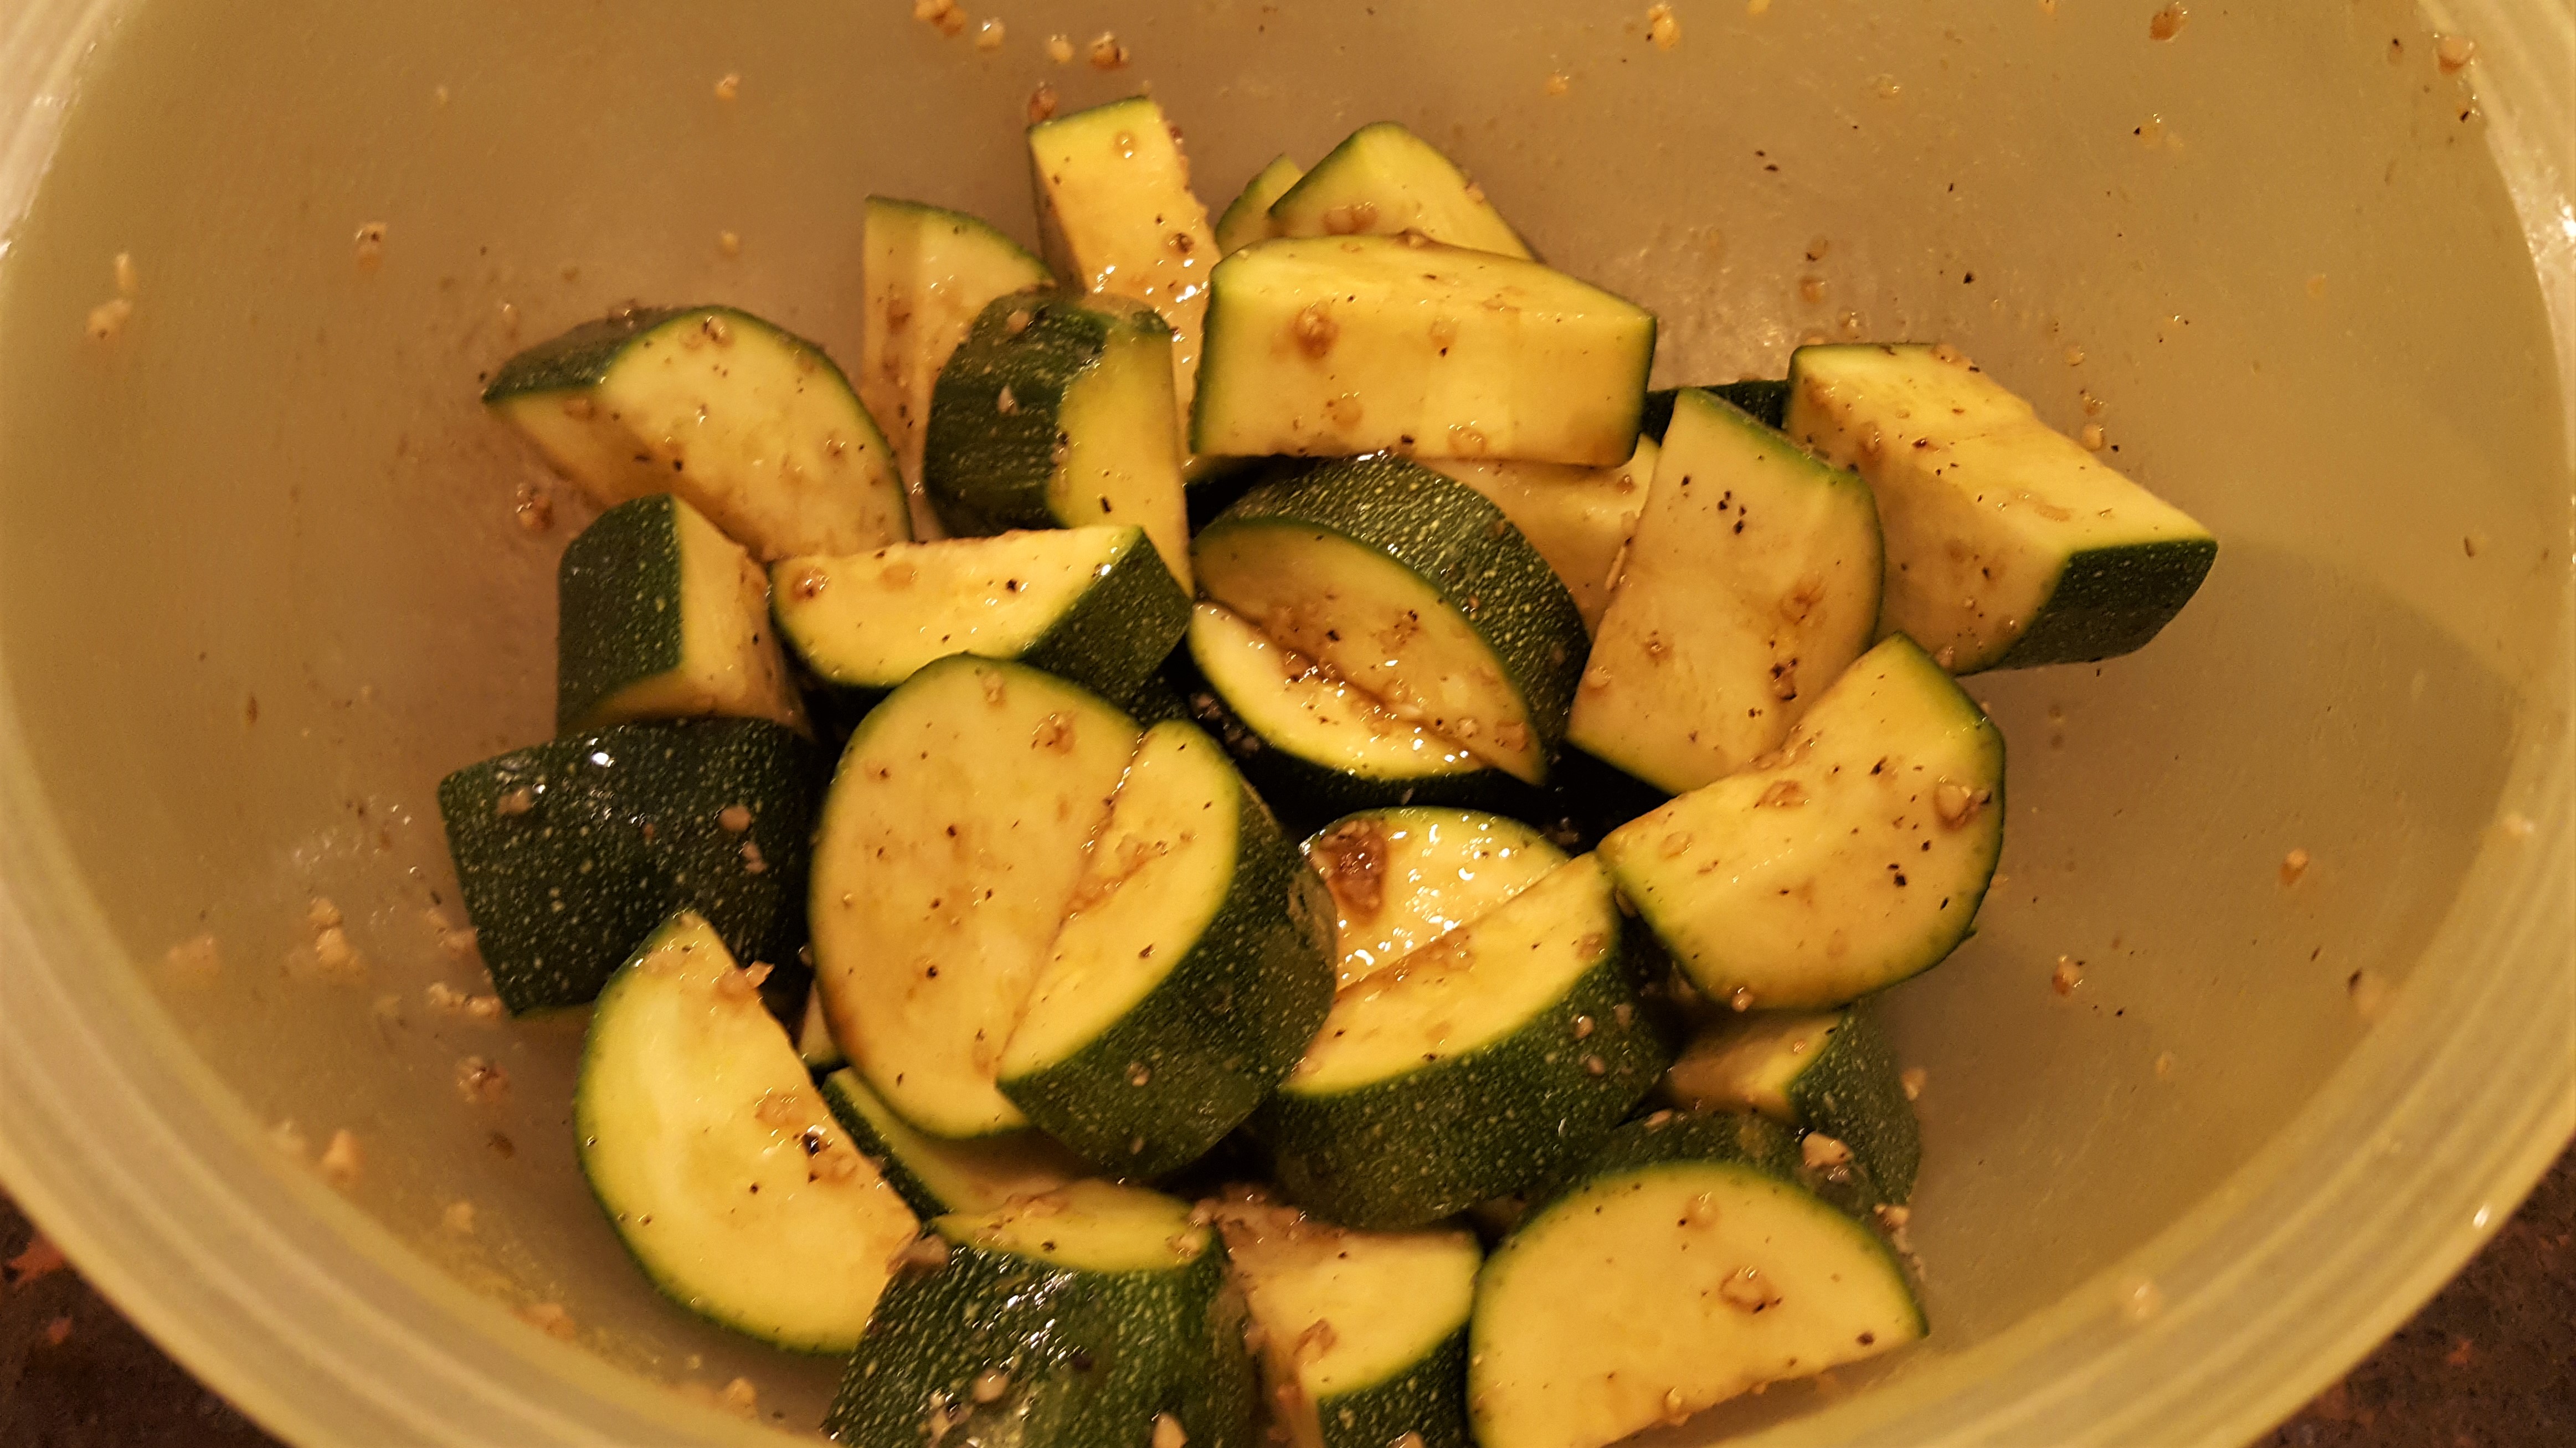 Zucchini and all the ingredients marinate for 20 minutes - Dining in with Danielle